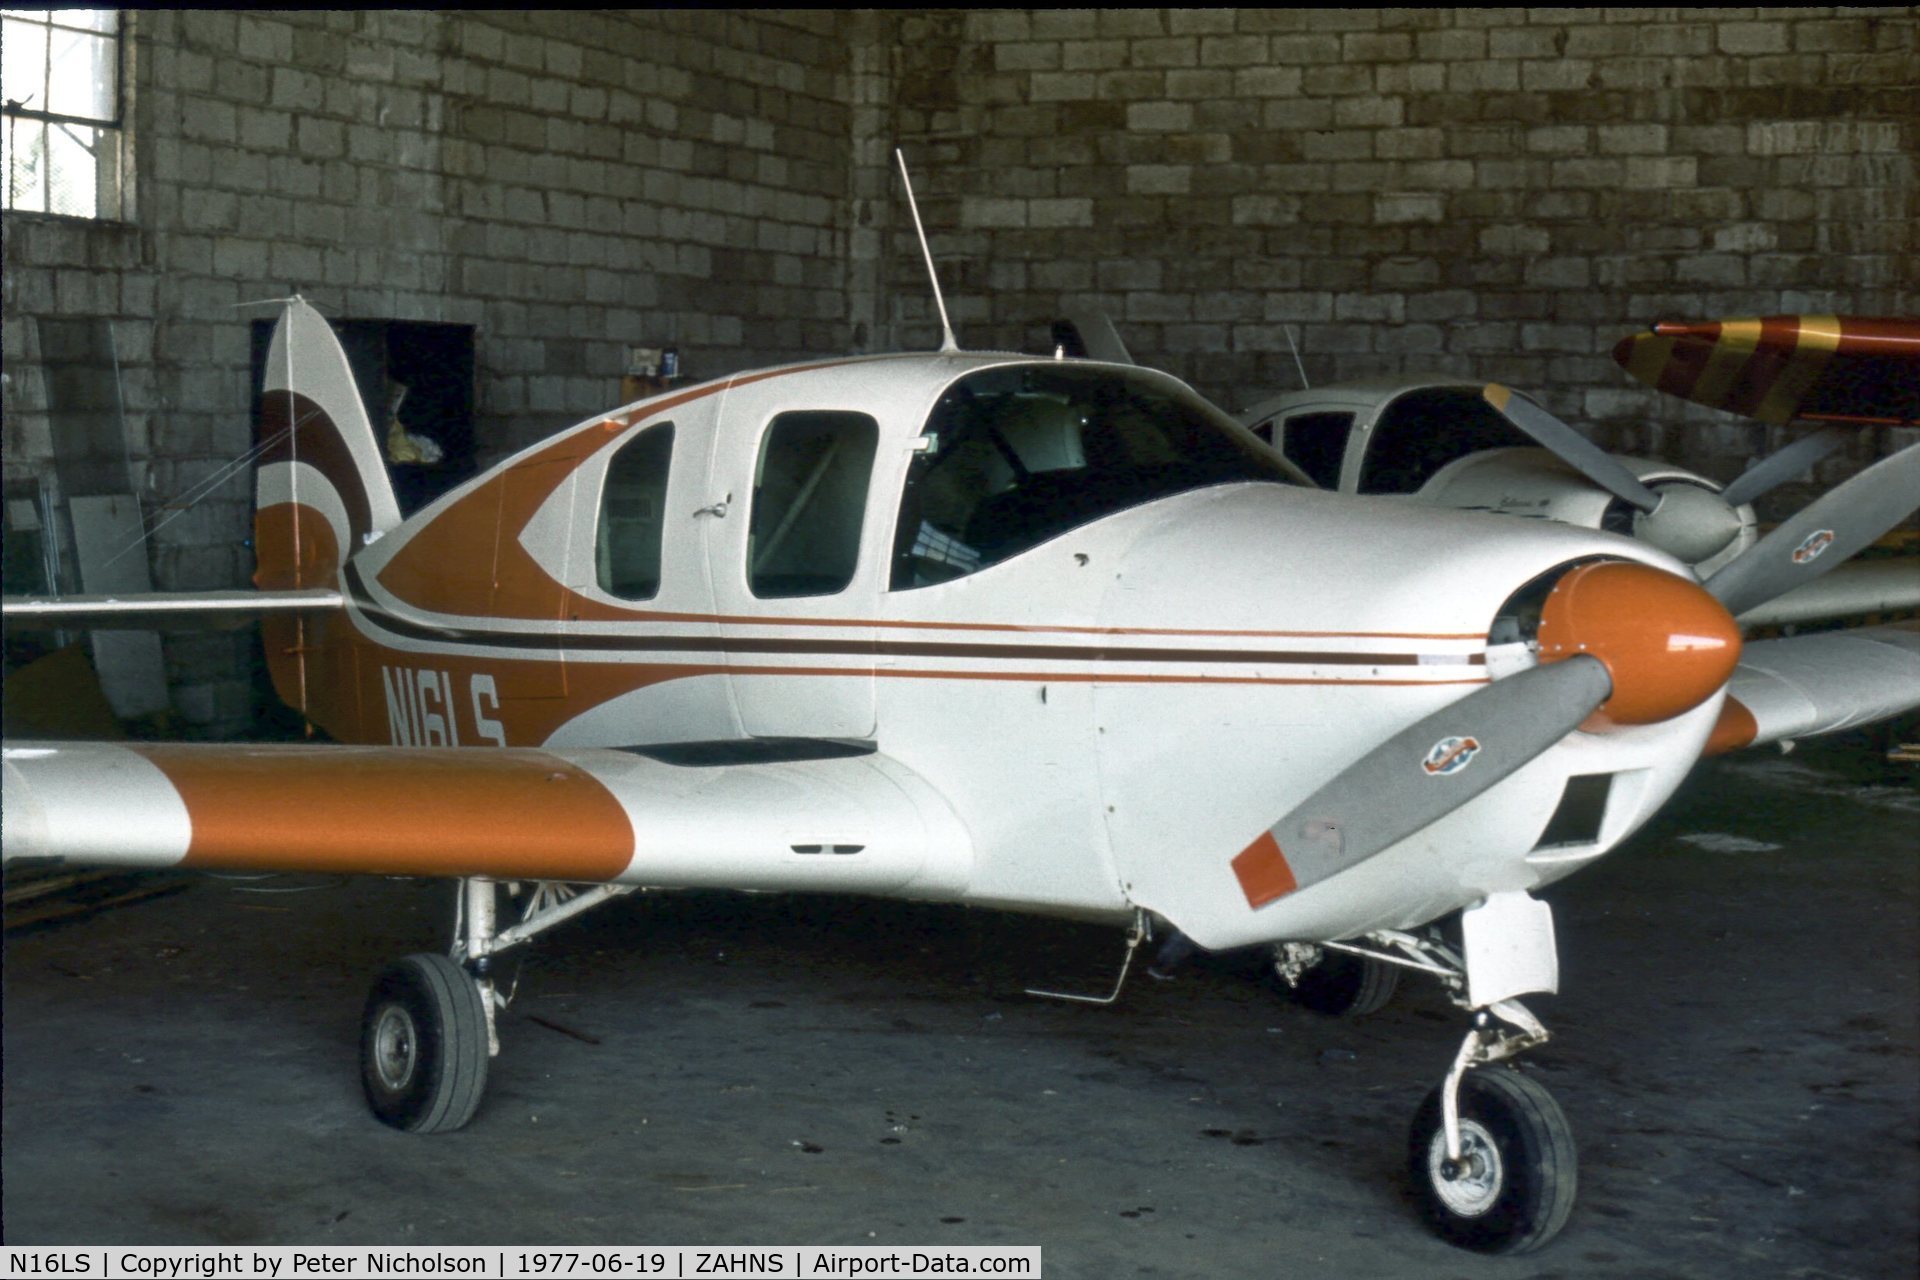 N16LS, 1959 Bellanca 14-19-3 Cruisair Senior C/N 4150, This Cruisemaster was seen hangered at Zahns Airport, Amityville NY in 1977 - airfield later closed in 1980,